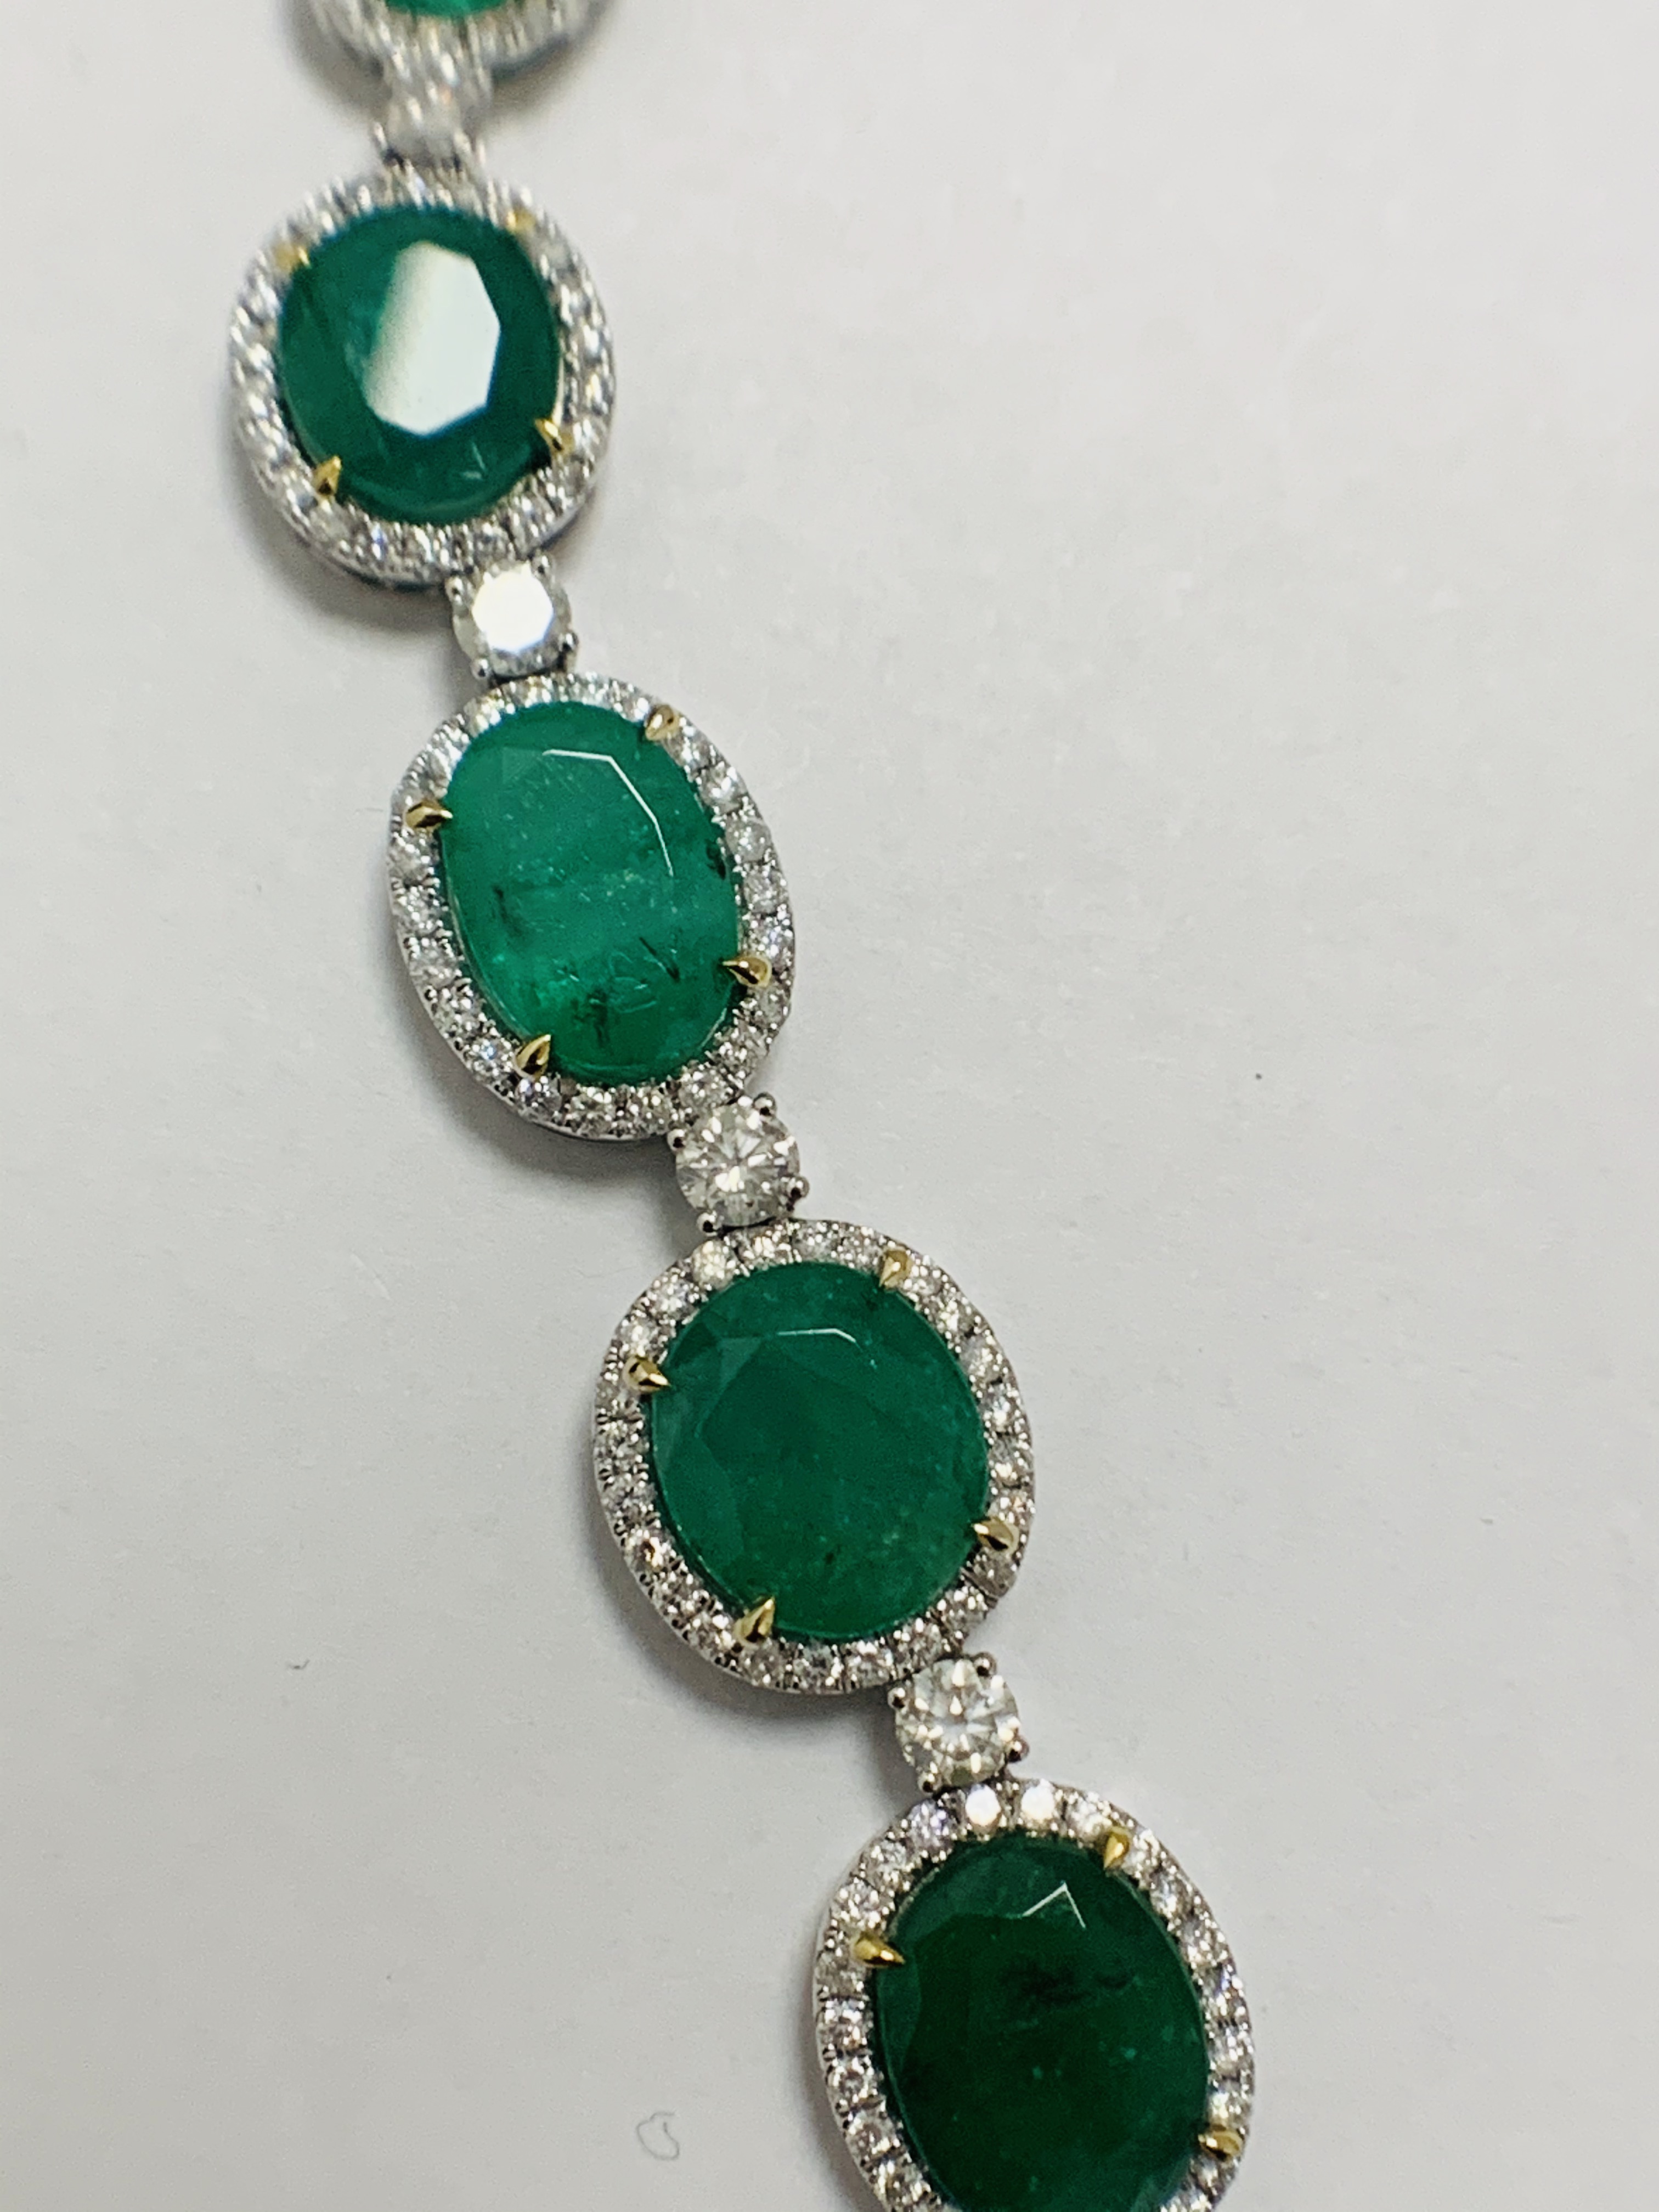 Platinum and Yellow Gold Emerald and Diamond necklace featuring, 29 oval cut, light to deep green Em - Image 22 of 36